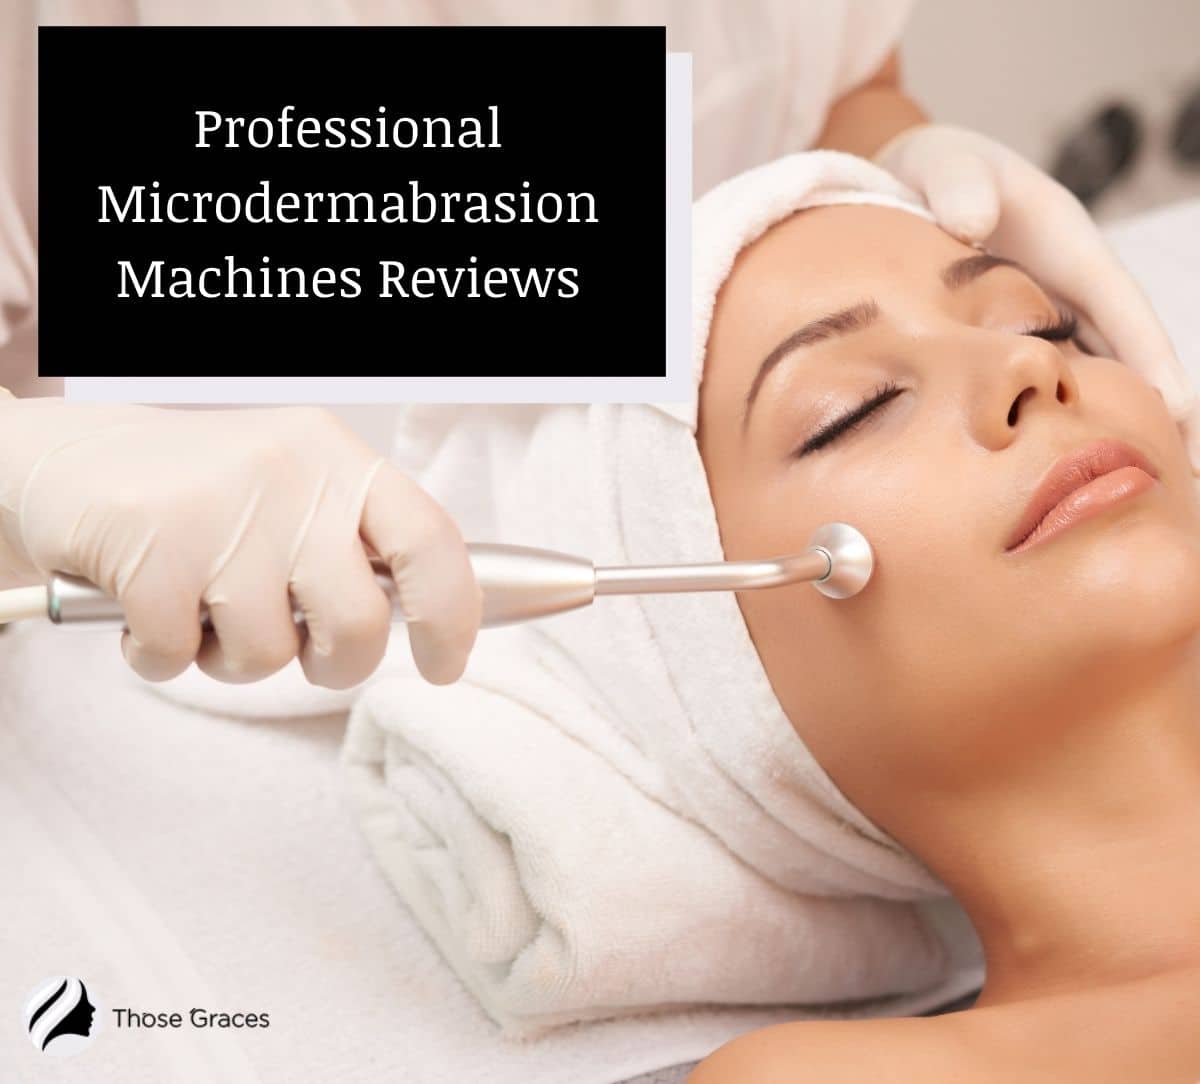 Professional Microdermabrasion Machines Reviews